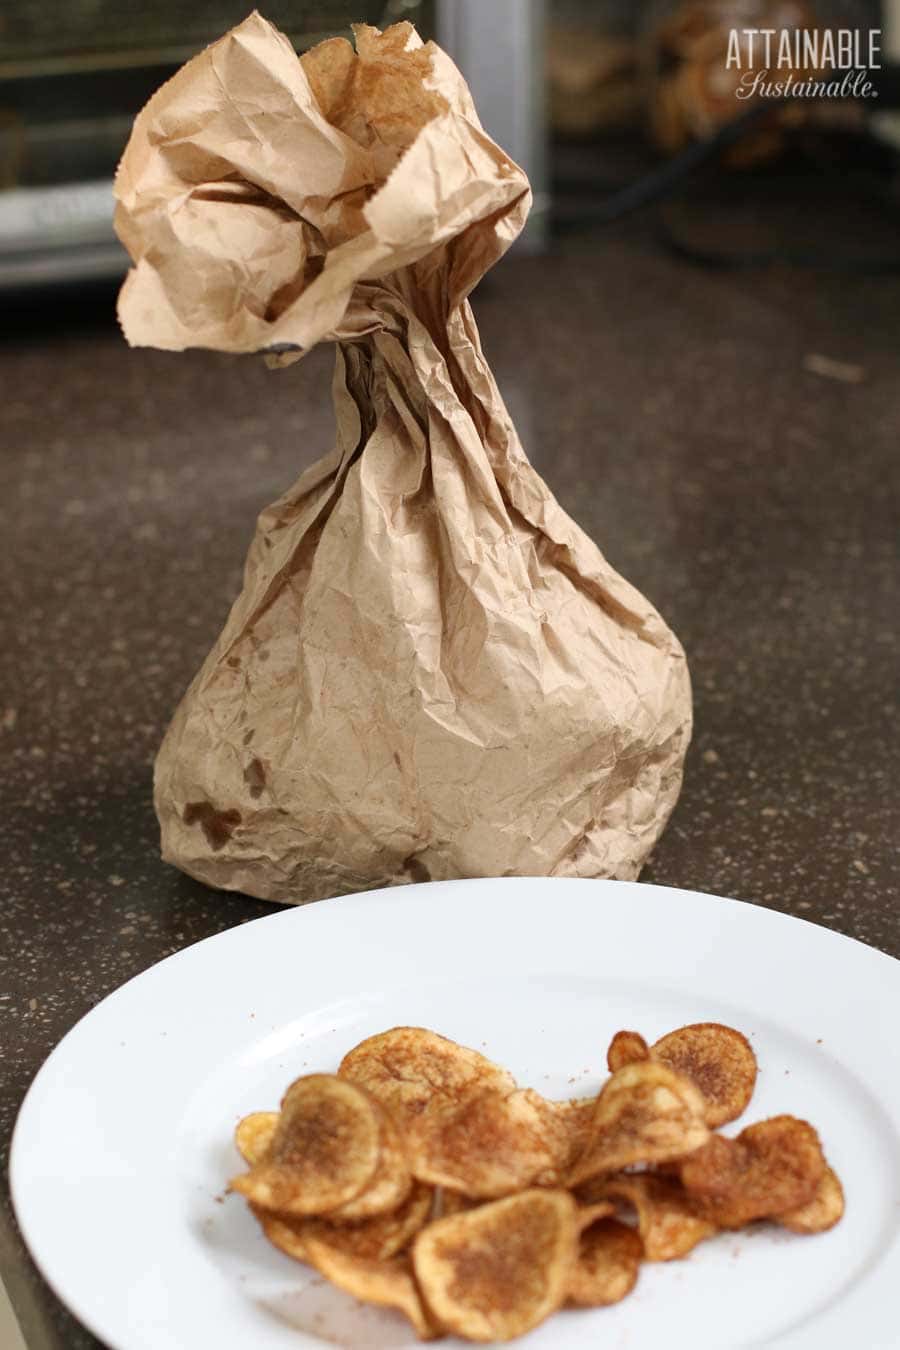 BBQ potato chips with a brown bag behind.